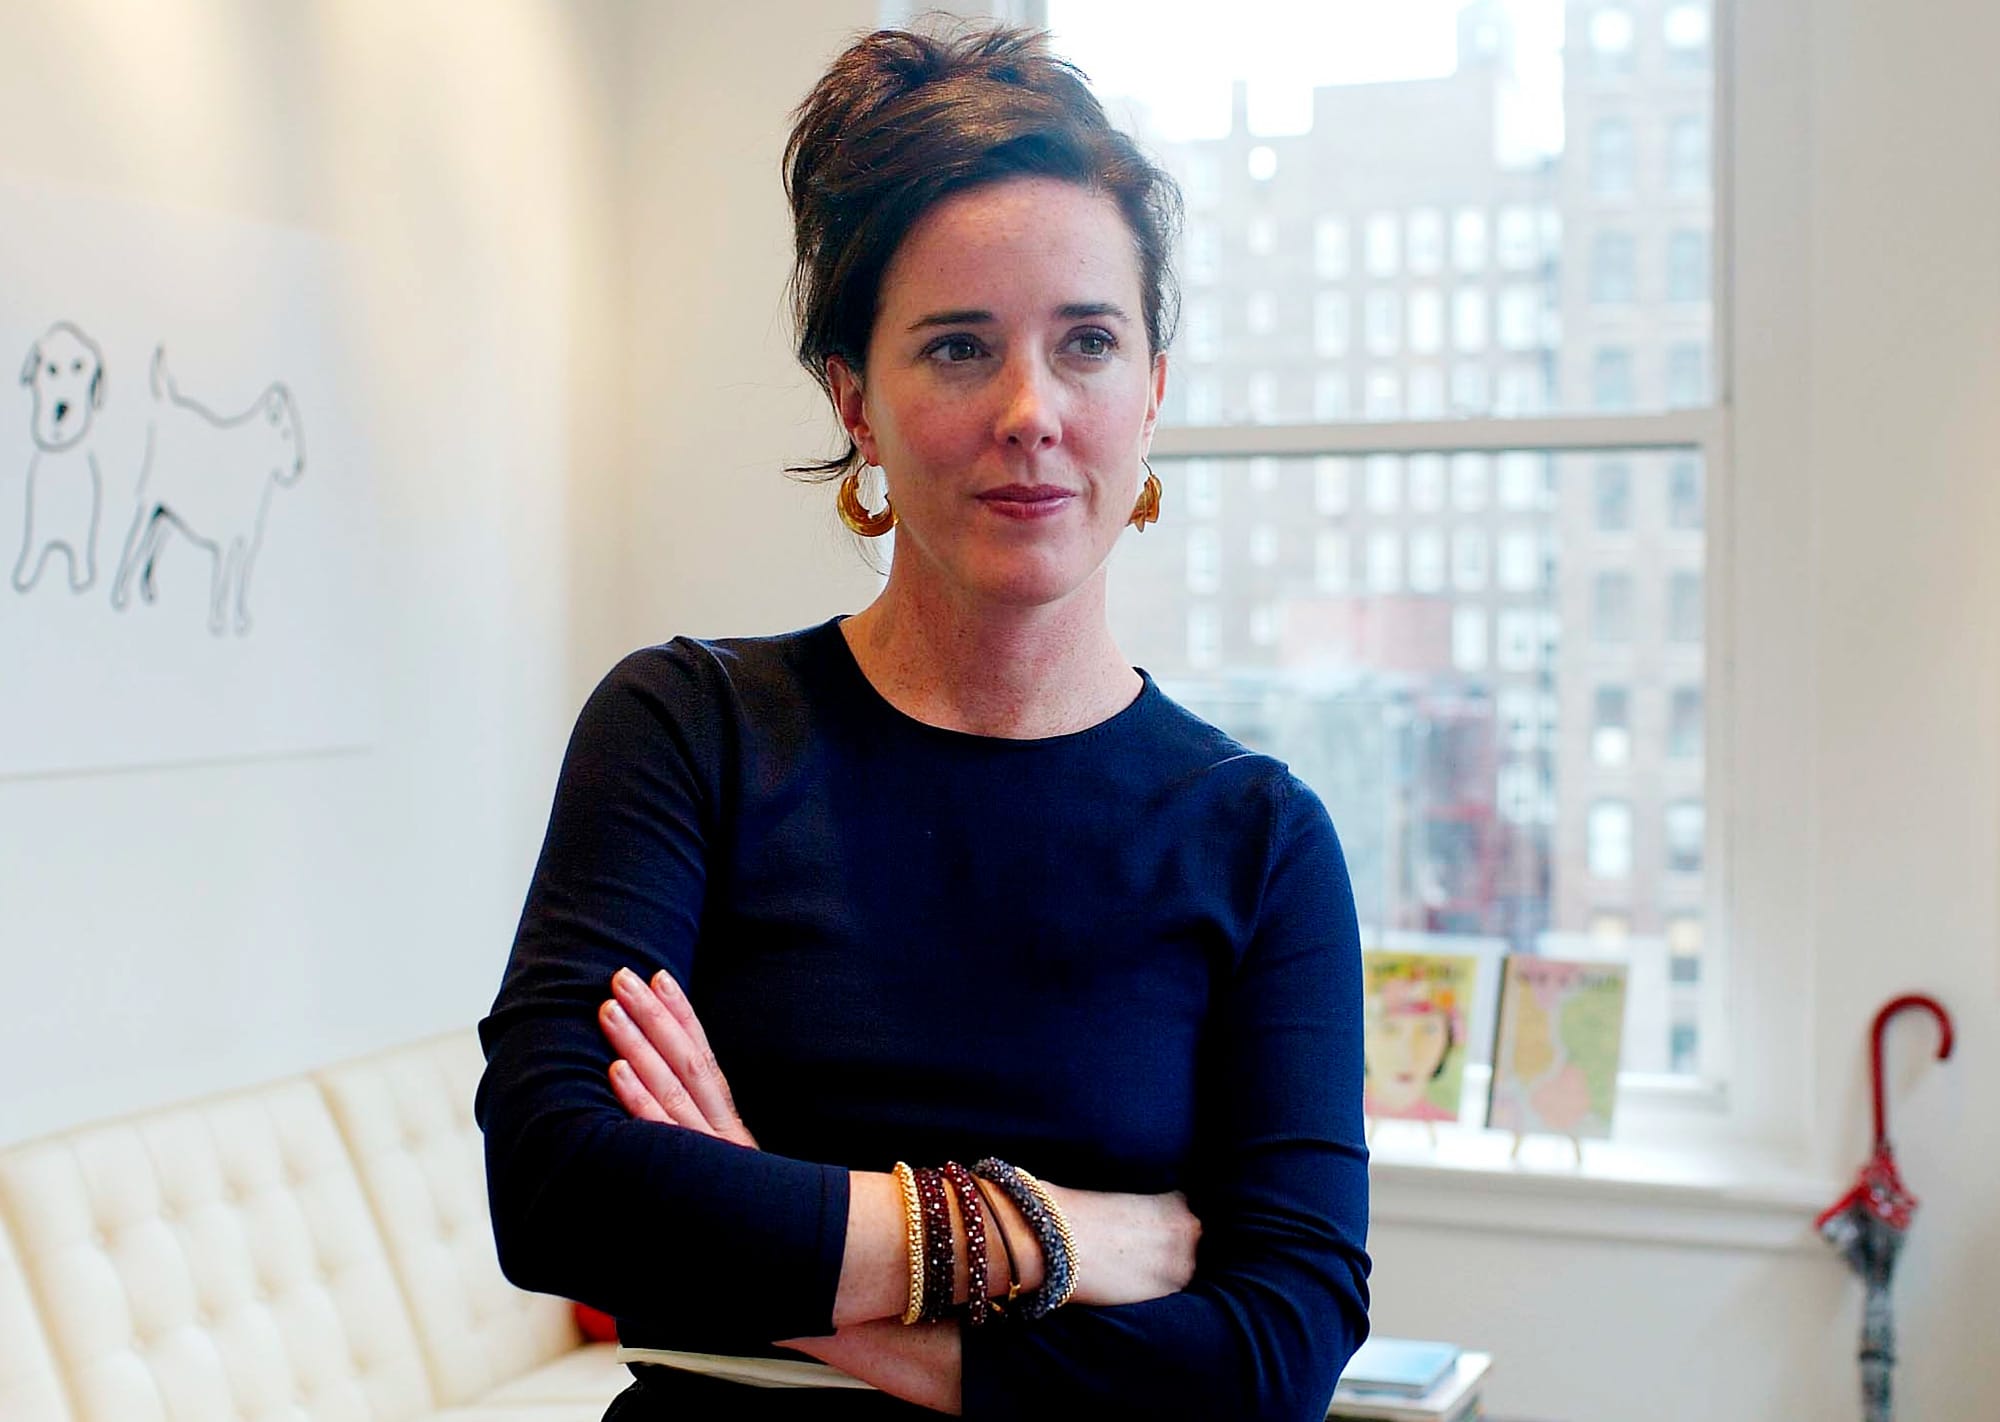 Total 37+ imagen did kate spade have mental health issues